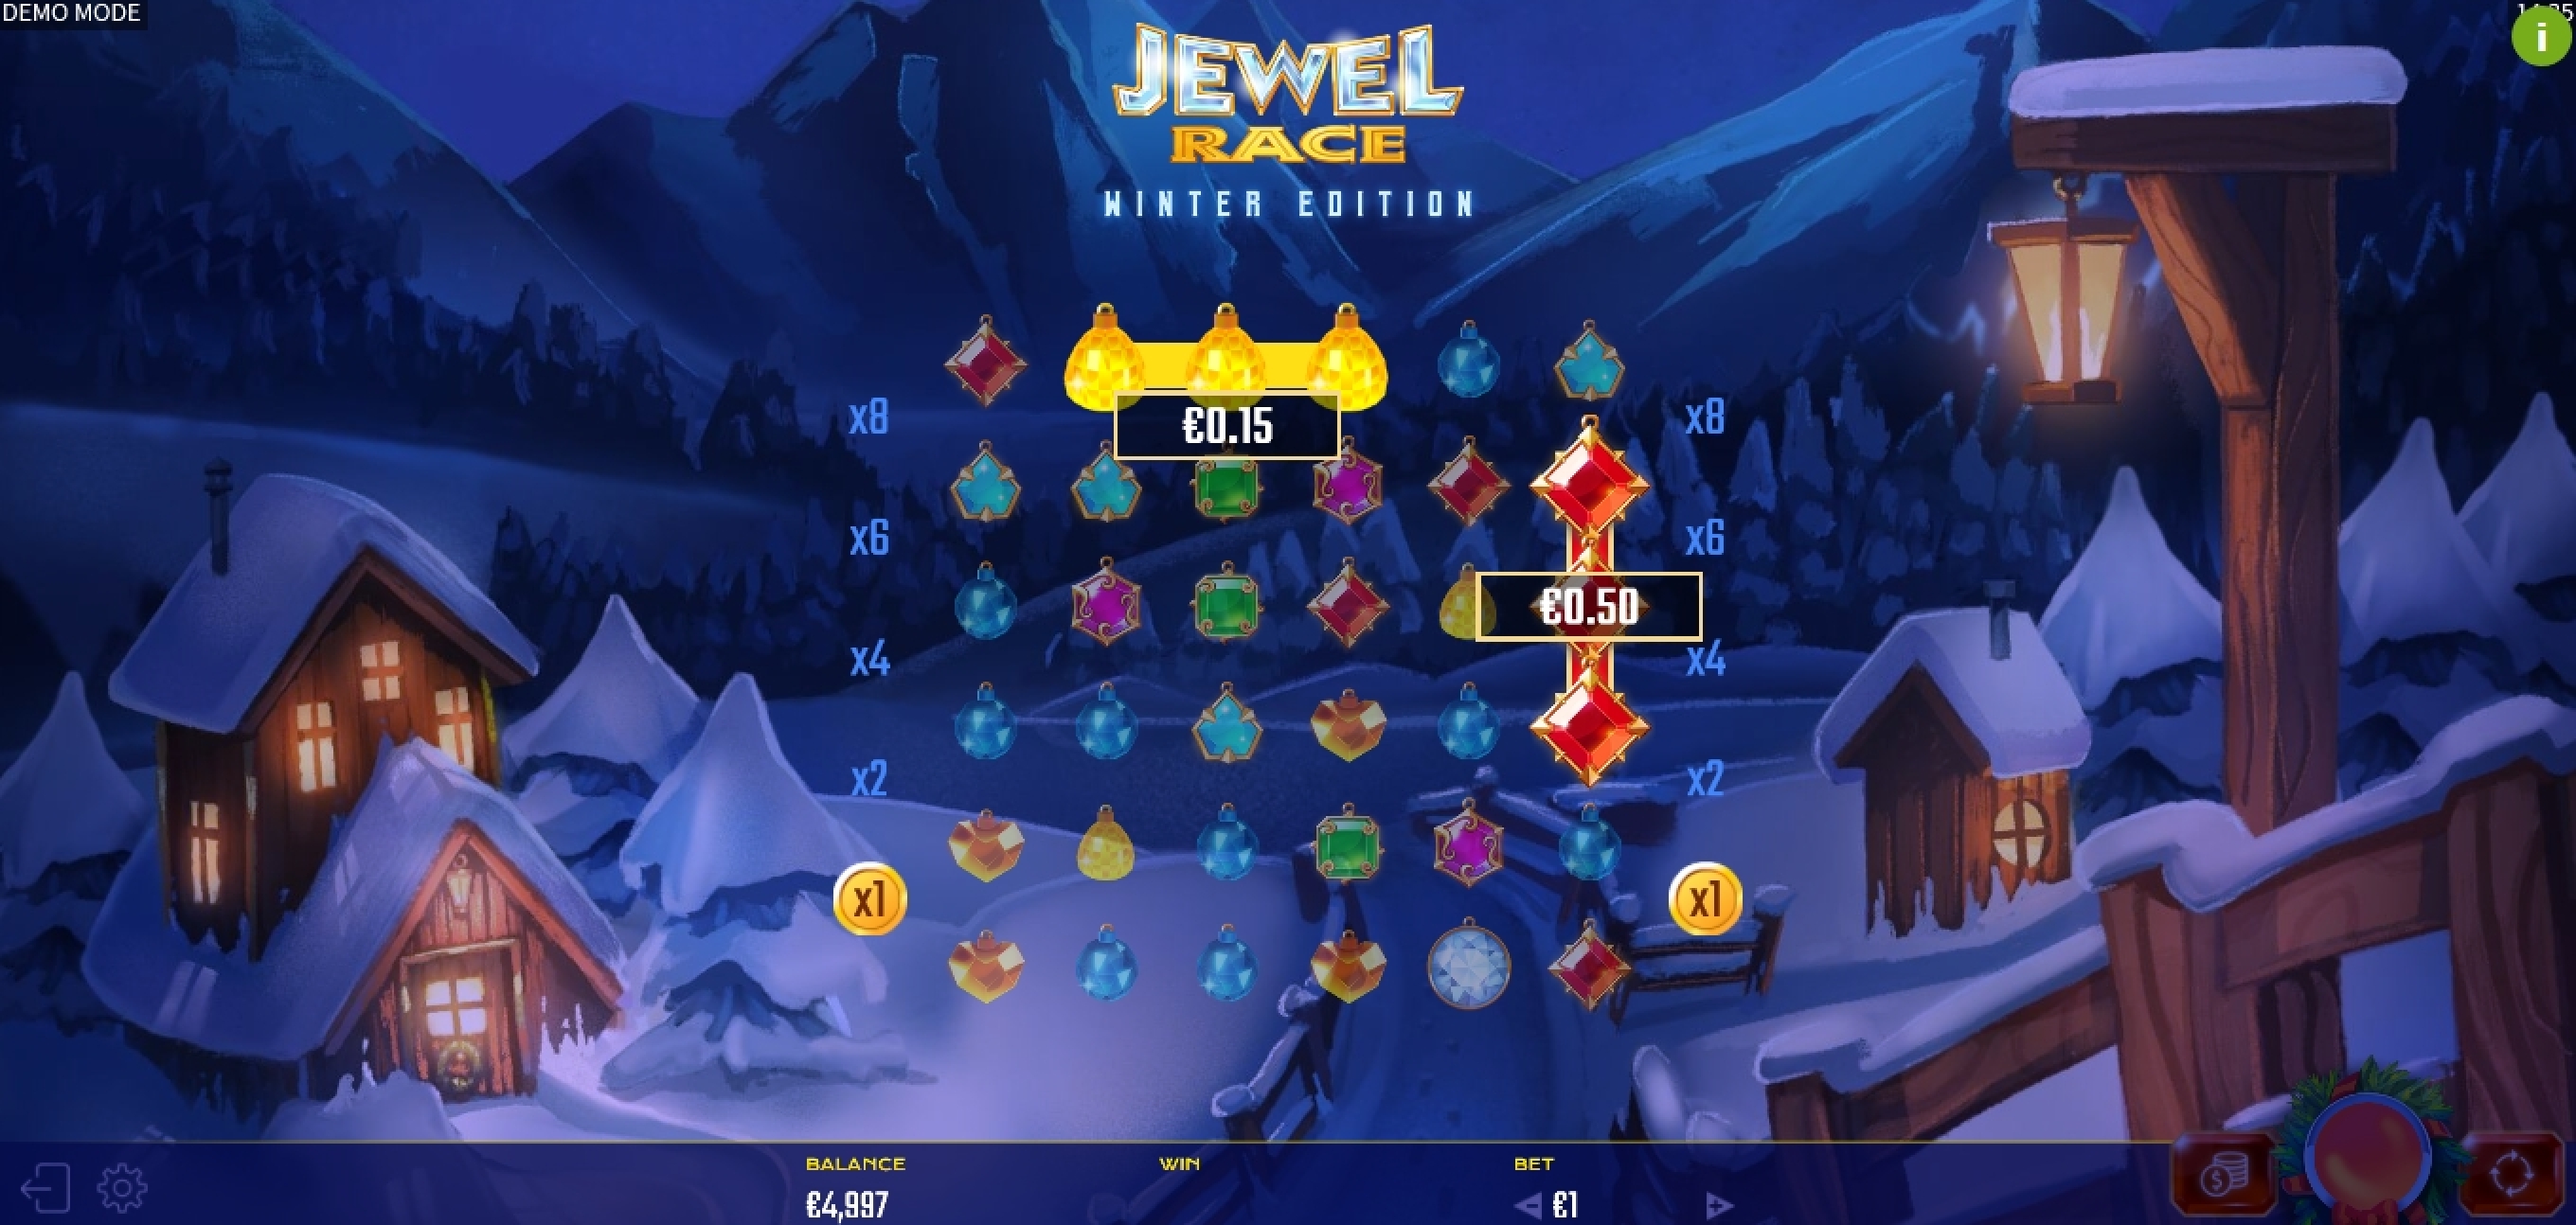 Win Money in Jewel Race Winter Edition Free Slot Game by Golden Hero